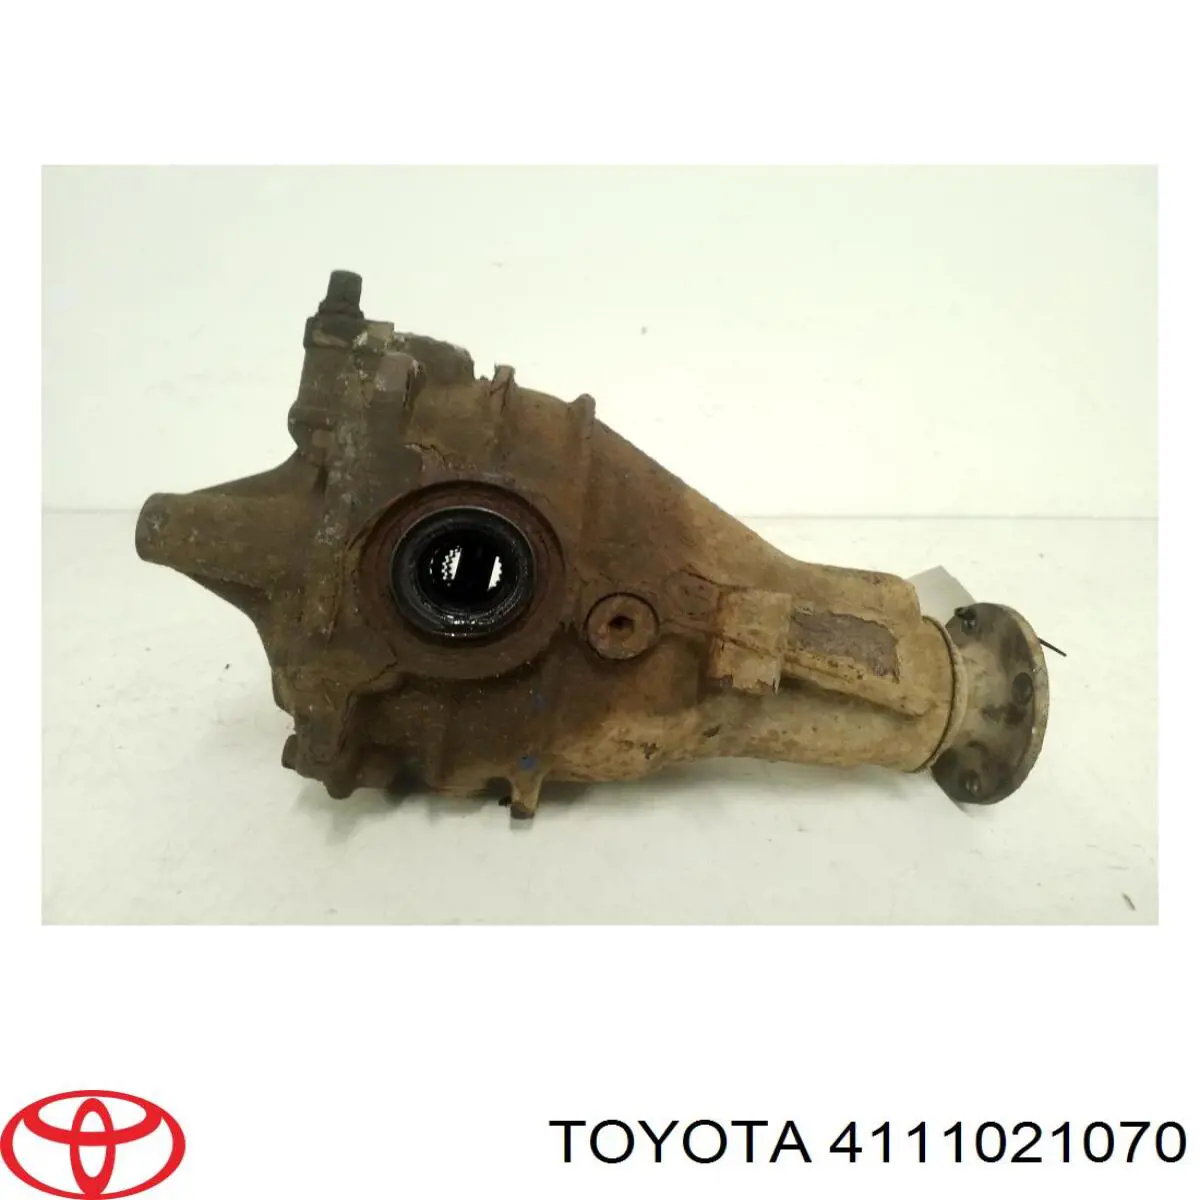 4111021070 Toyota diferencial eje trasero